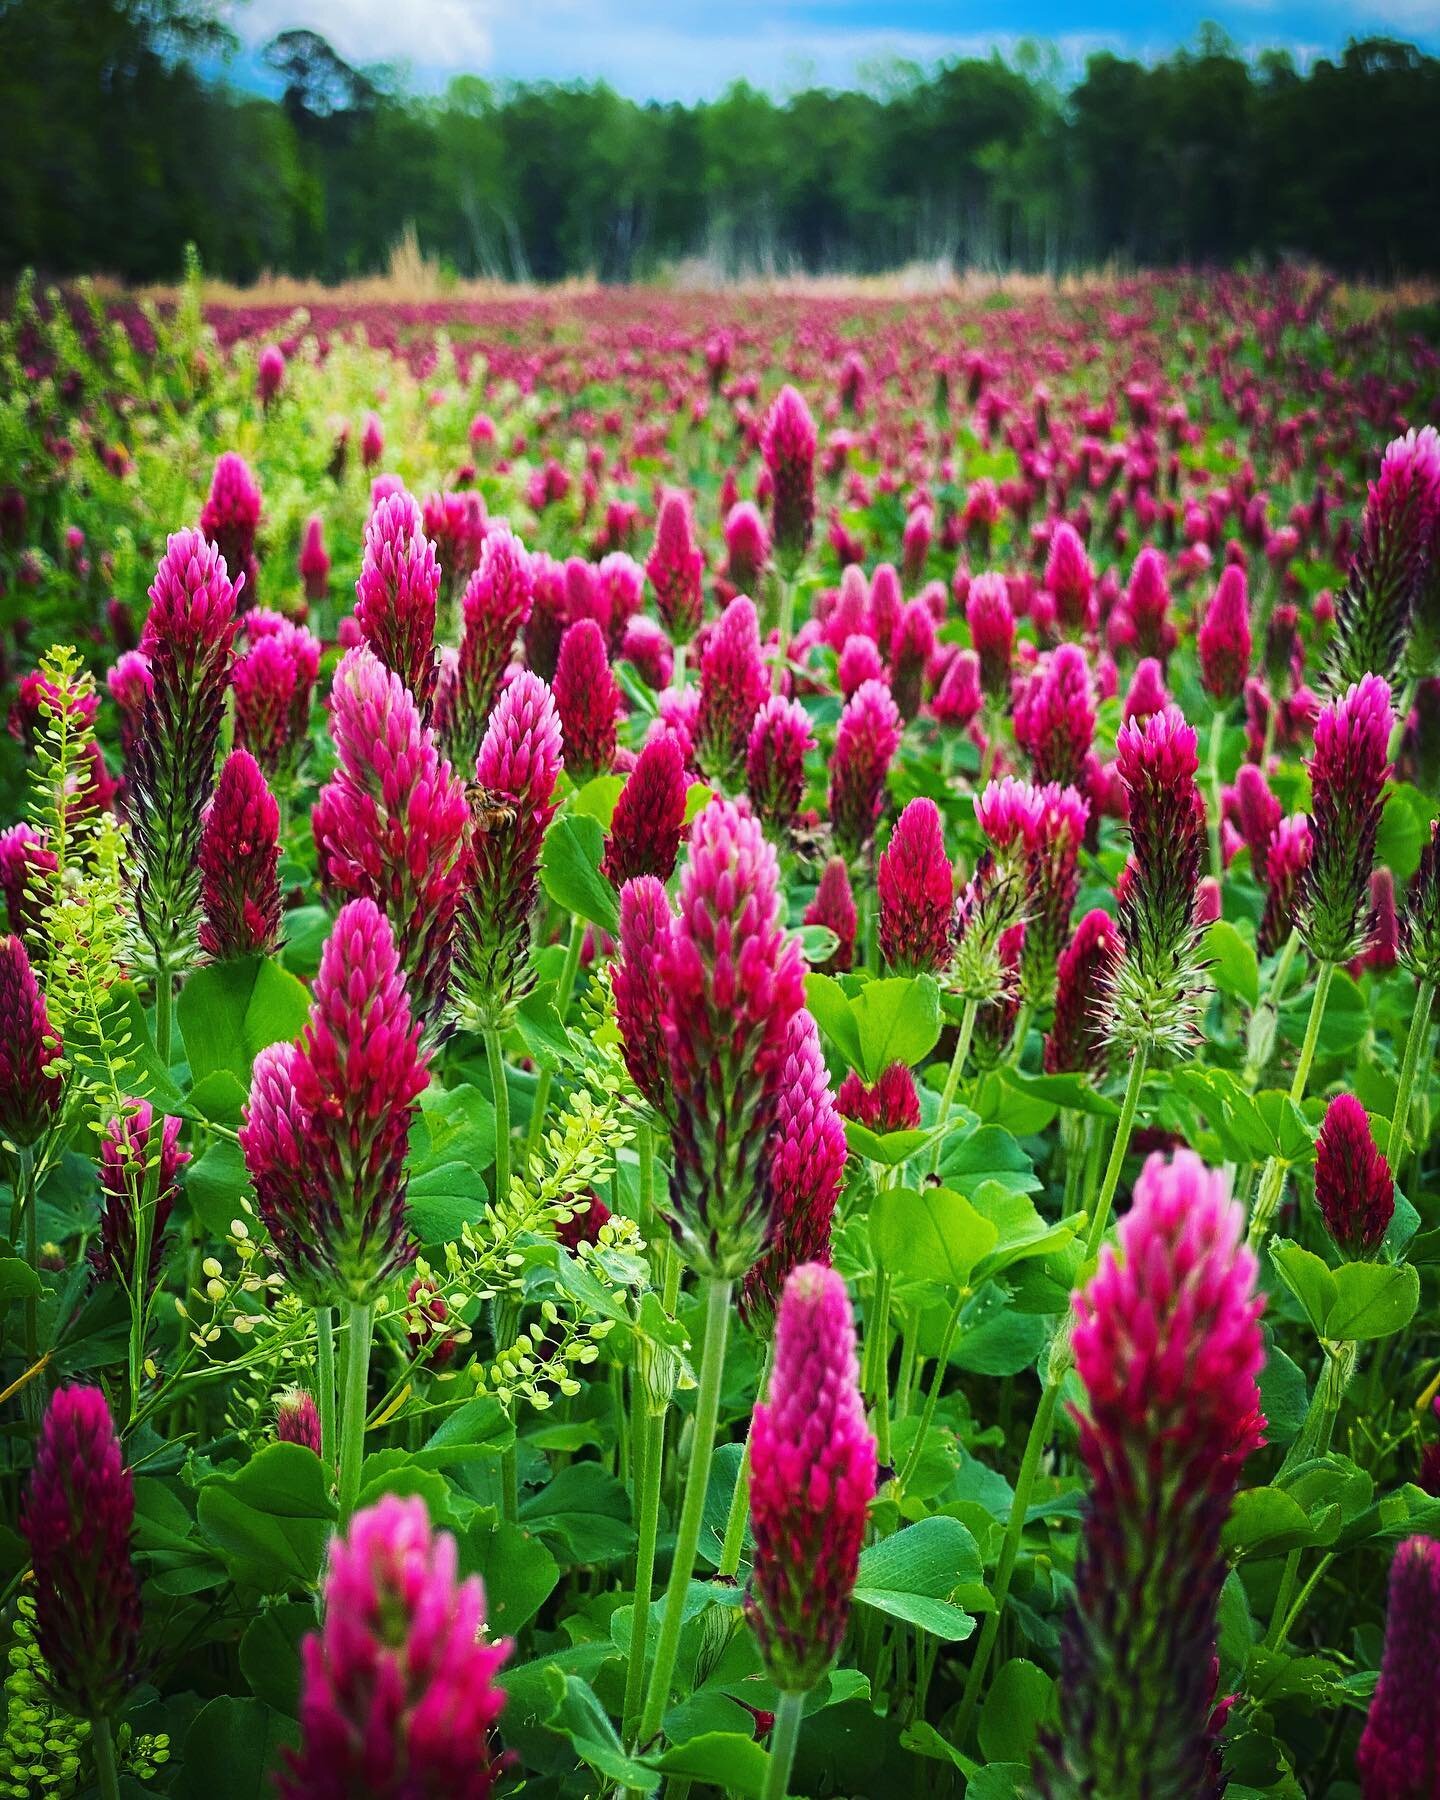 Every days Earth-day here at #microledonfarm. Hope you guys are taking the time to stop, look up from your phone and appreciate all its glory. She&rsquo;s one of a kind. 
.
.
.
#earthlover #regenerativefarming #redclover #devinedesign #myrtlebeachsc 